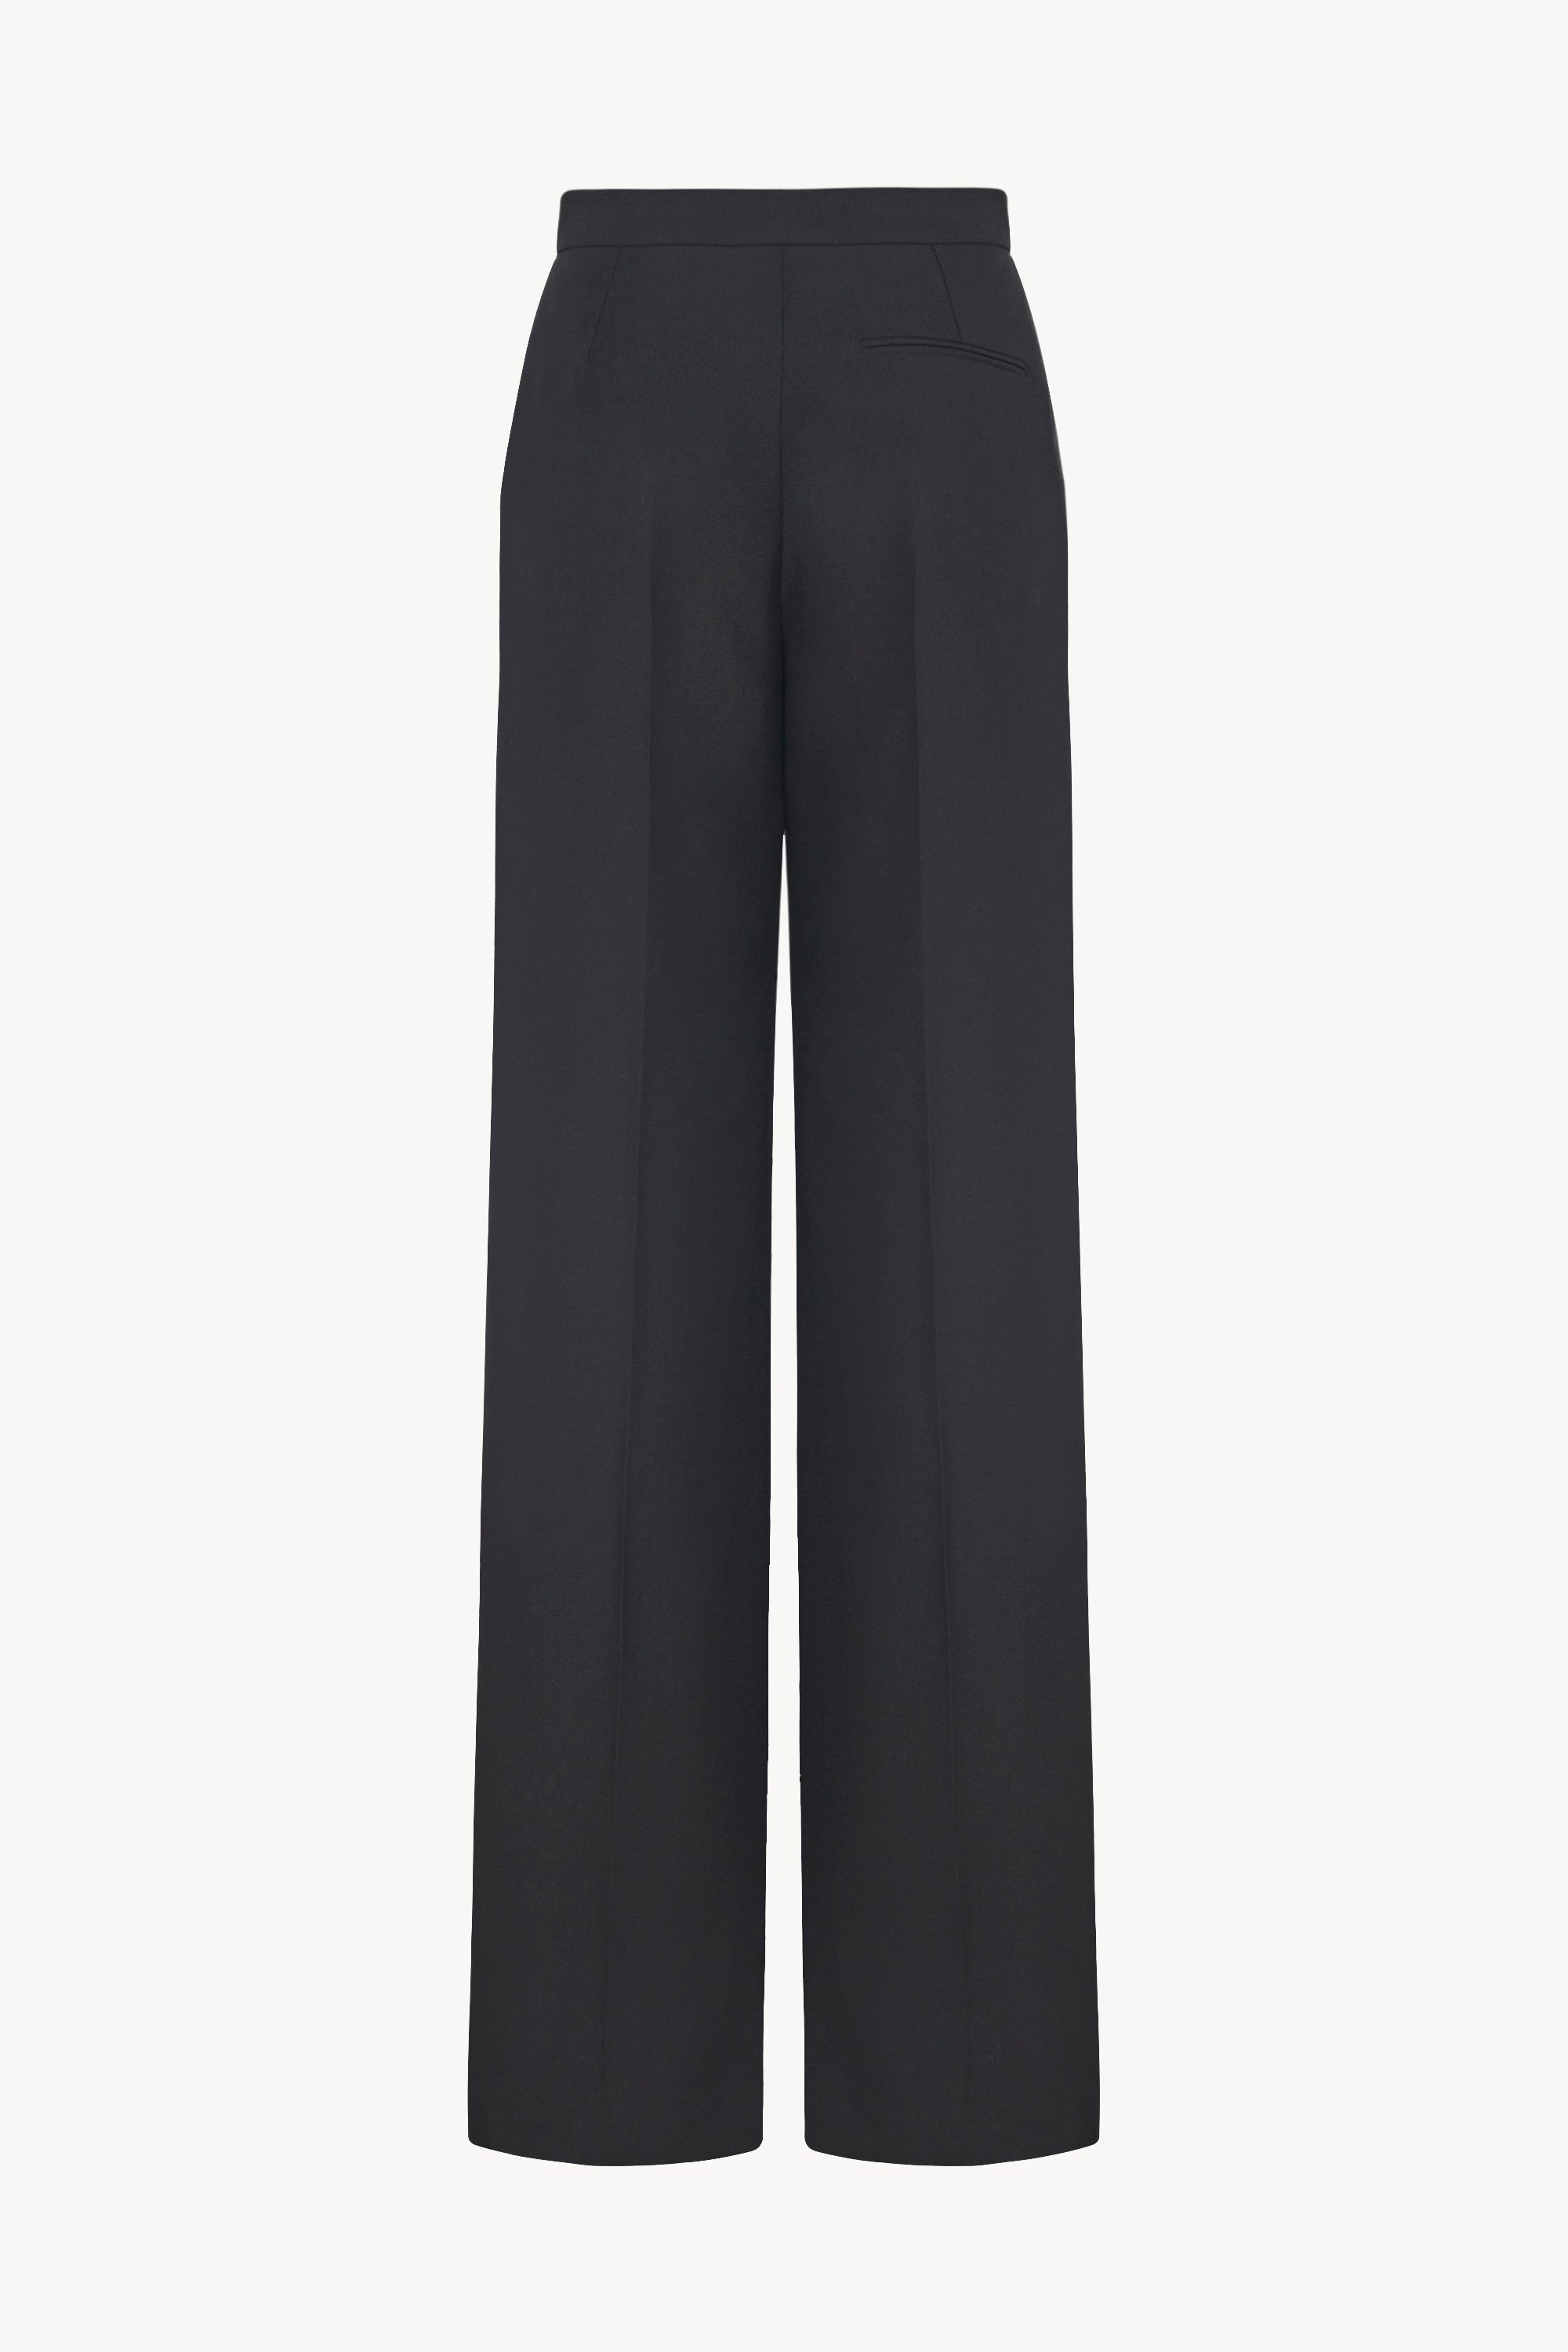 Delton Pant in Wool and Mohair - 2